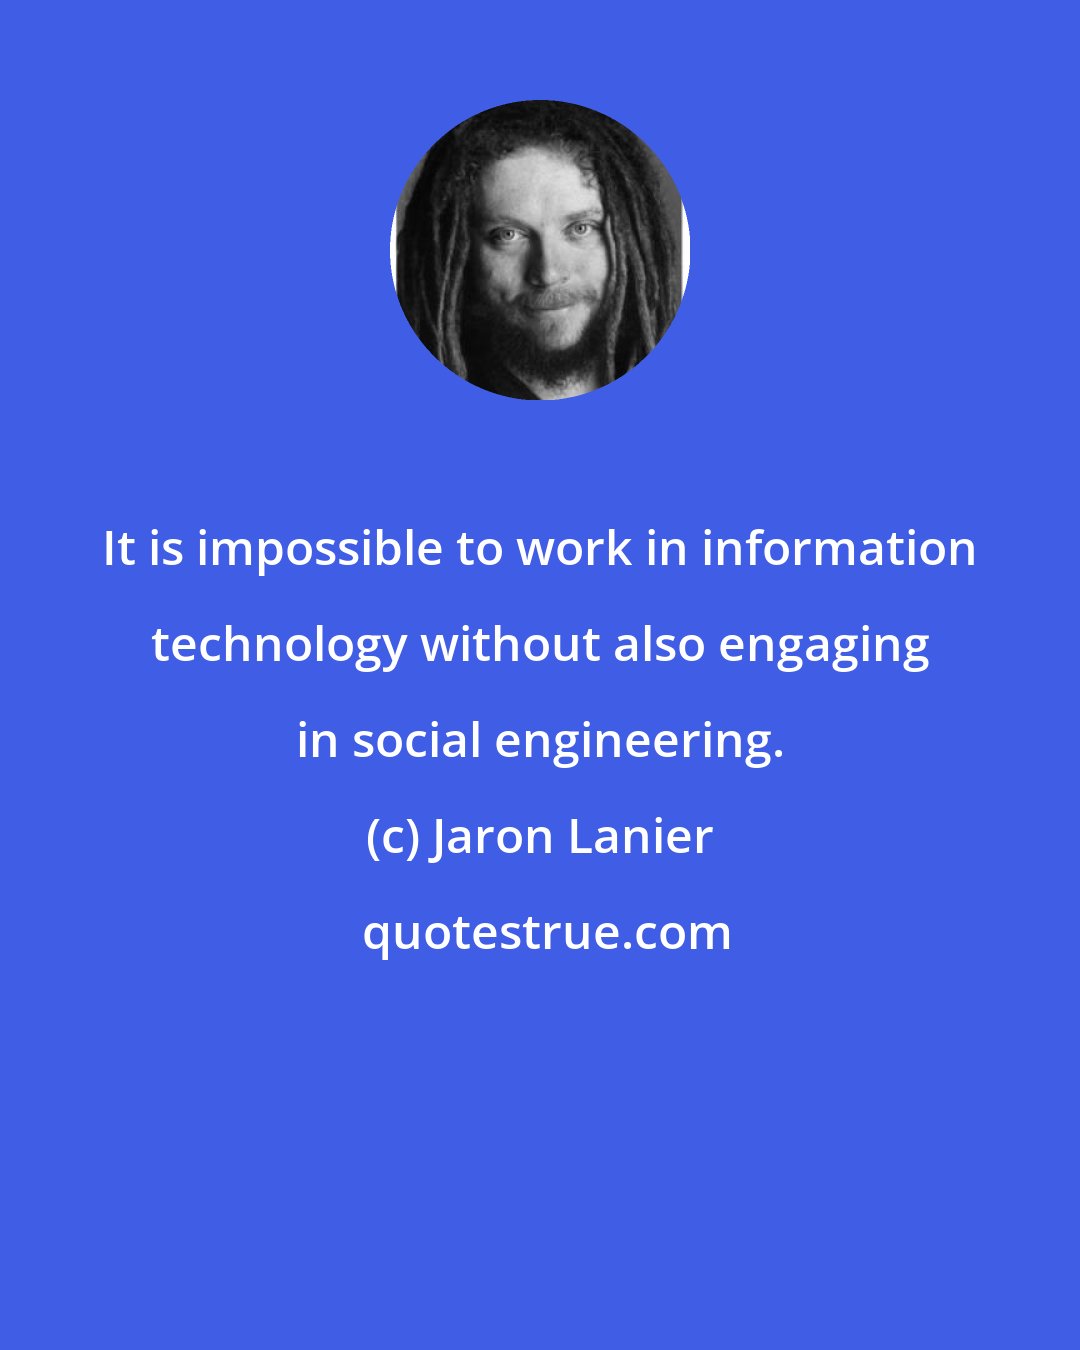 Jaron Lanier: It is impossible to work in information technology without also engaging in social engineering.